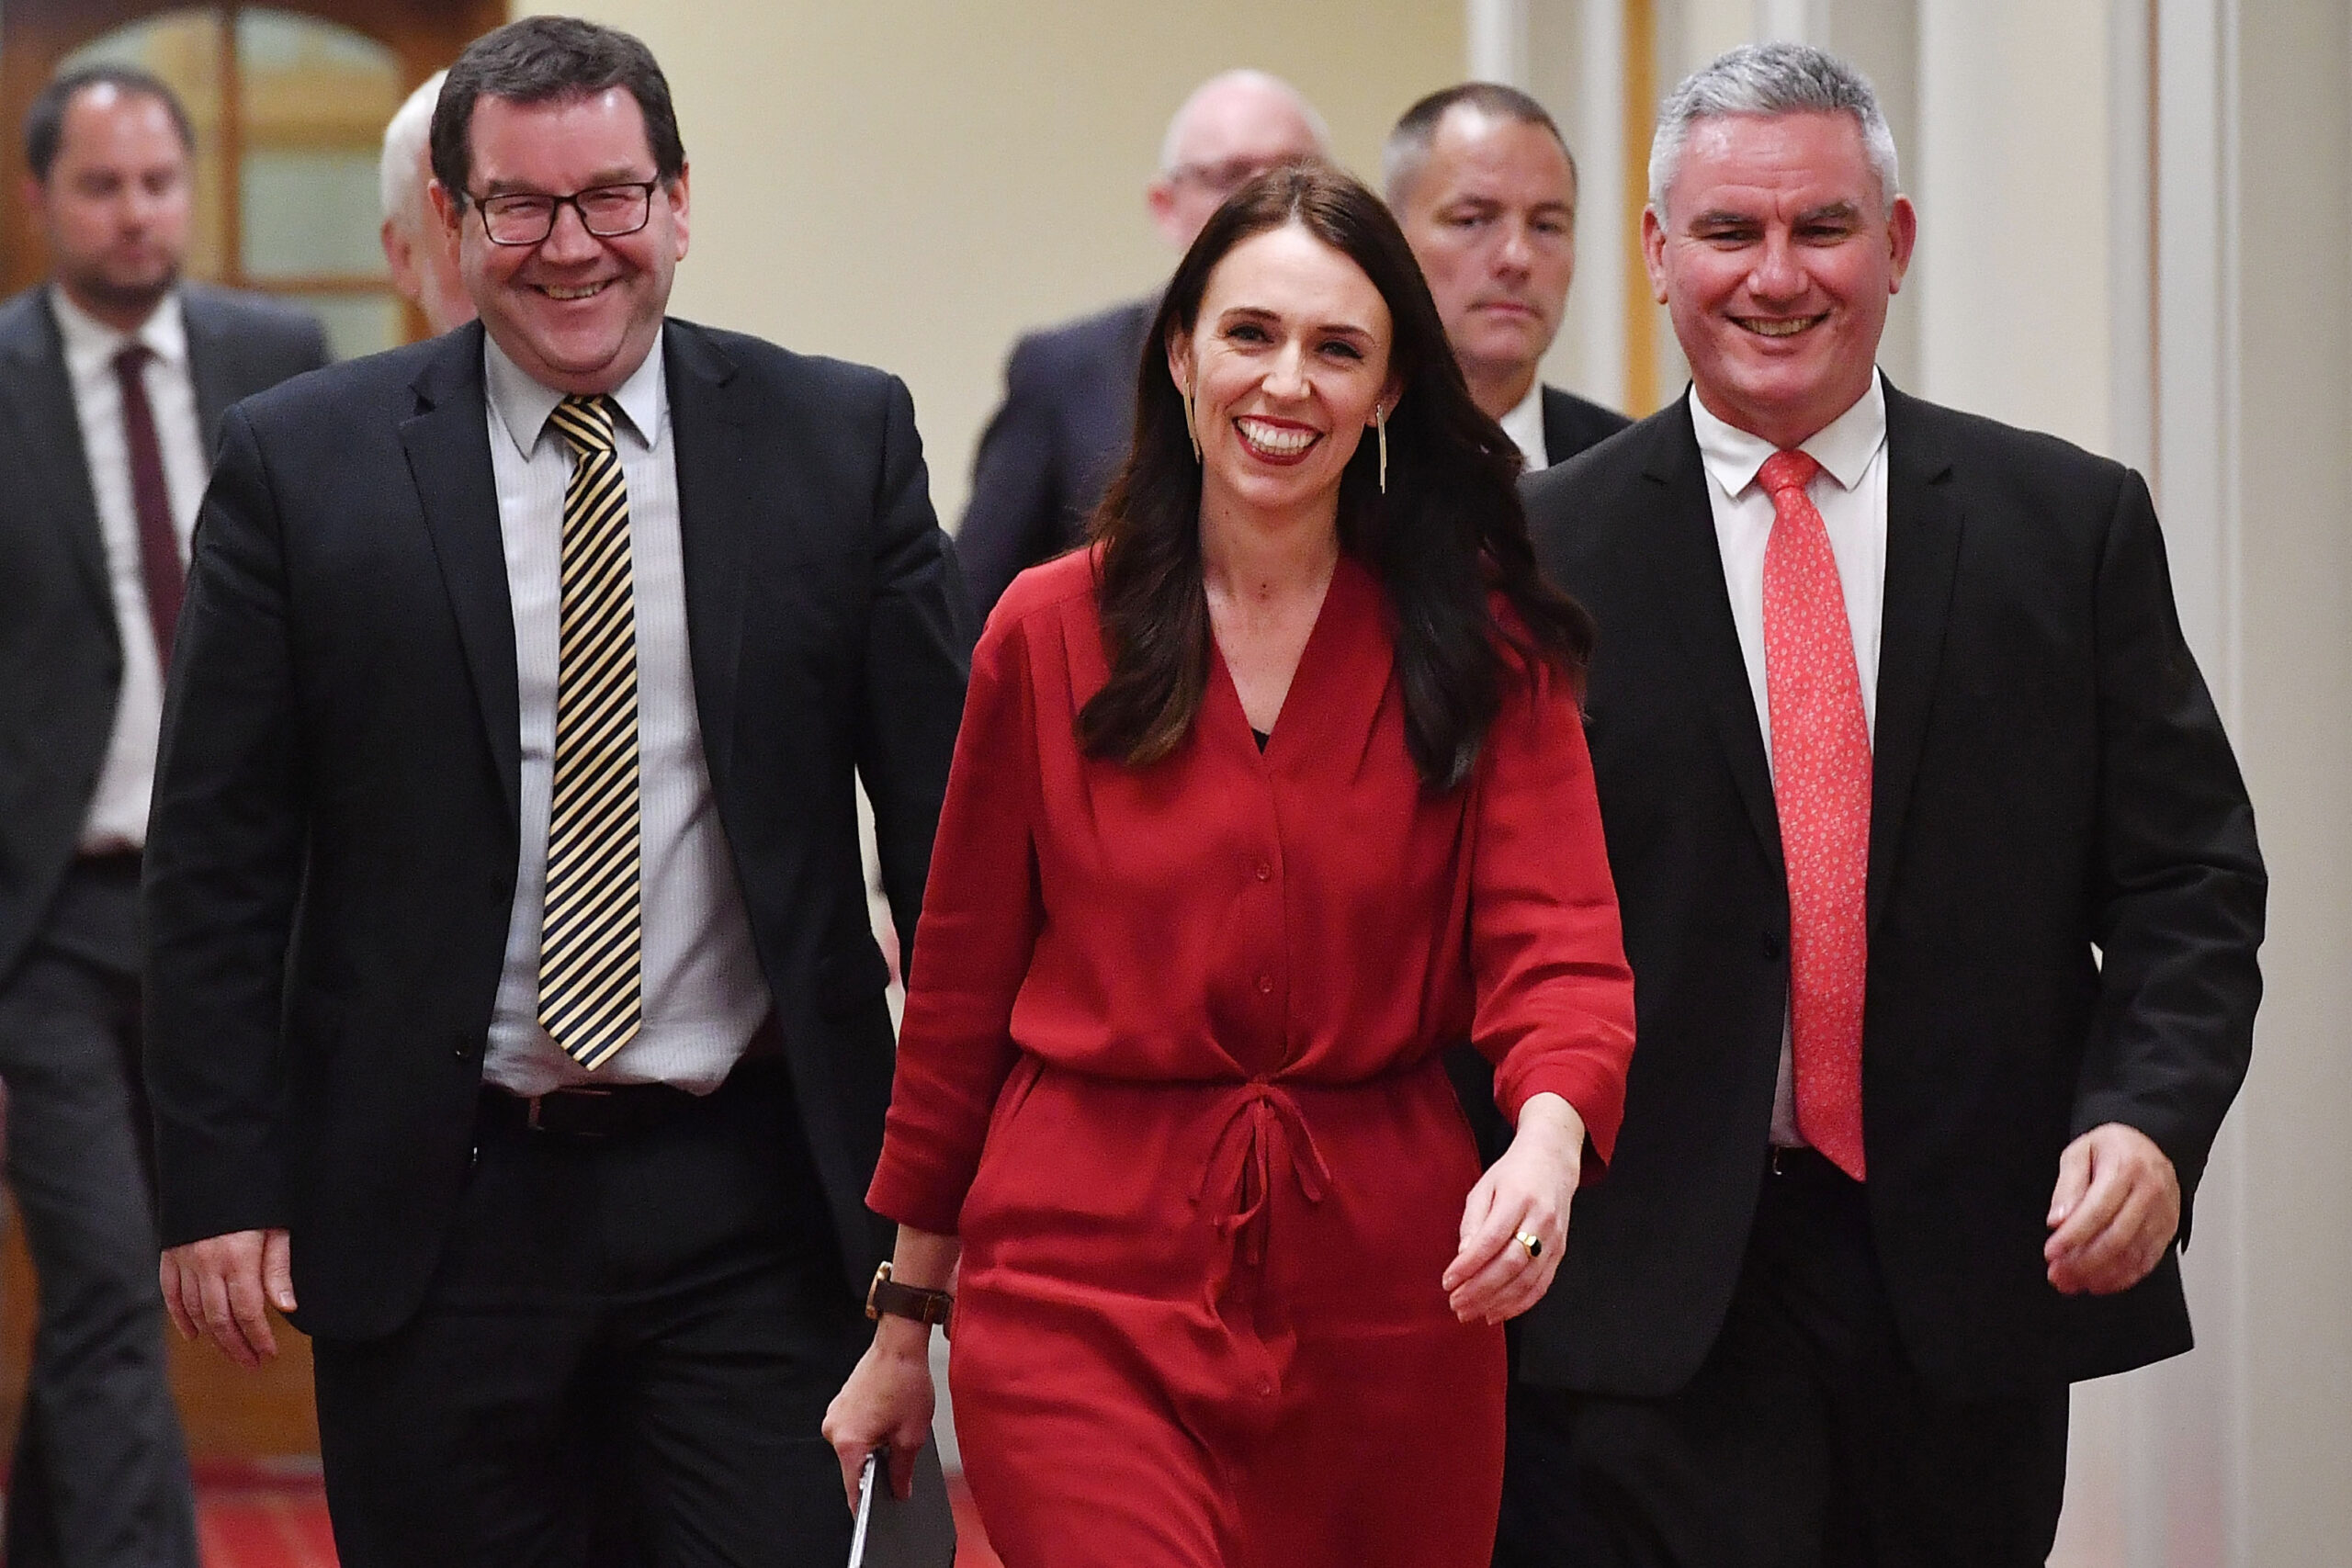 Jacinda Ardern and her new government bring hope